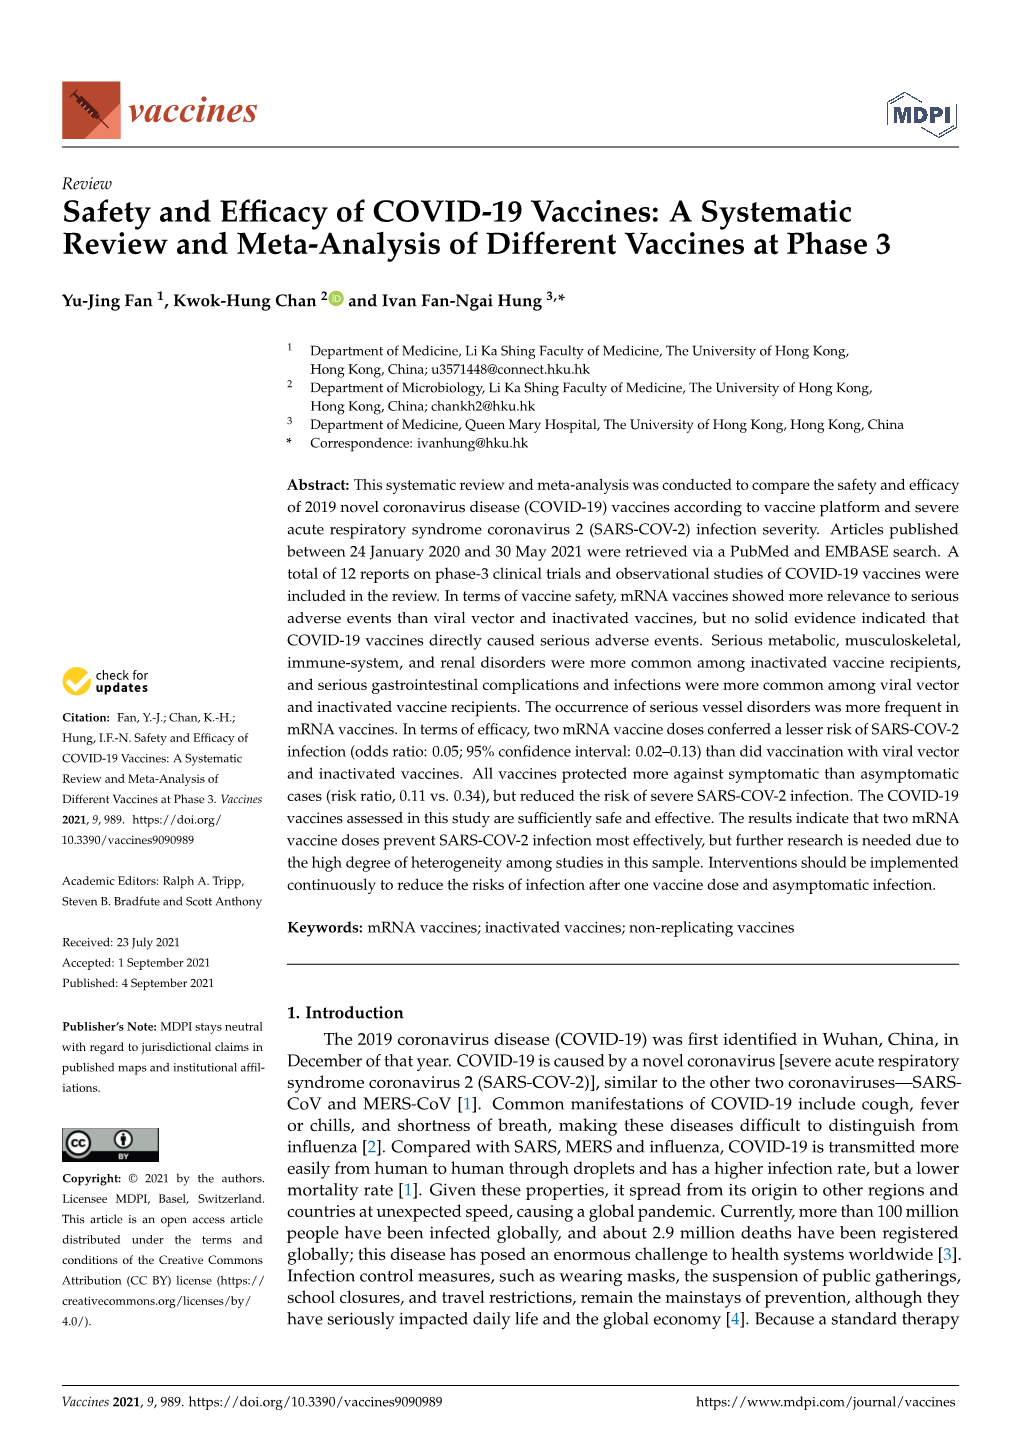 Safety and Efficacy of COVID-19 Vaccines: a Systematic Review And